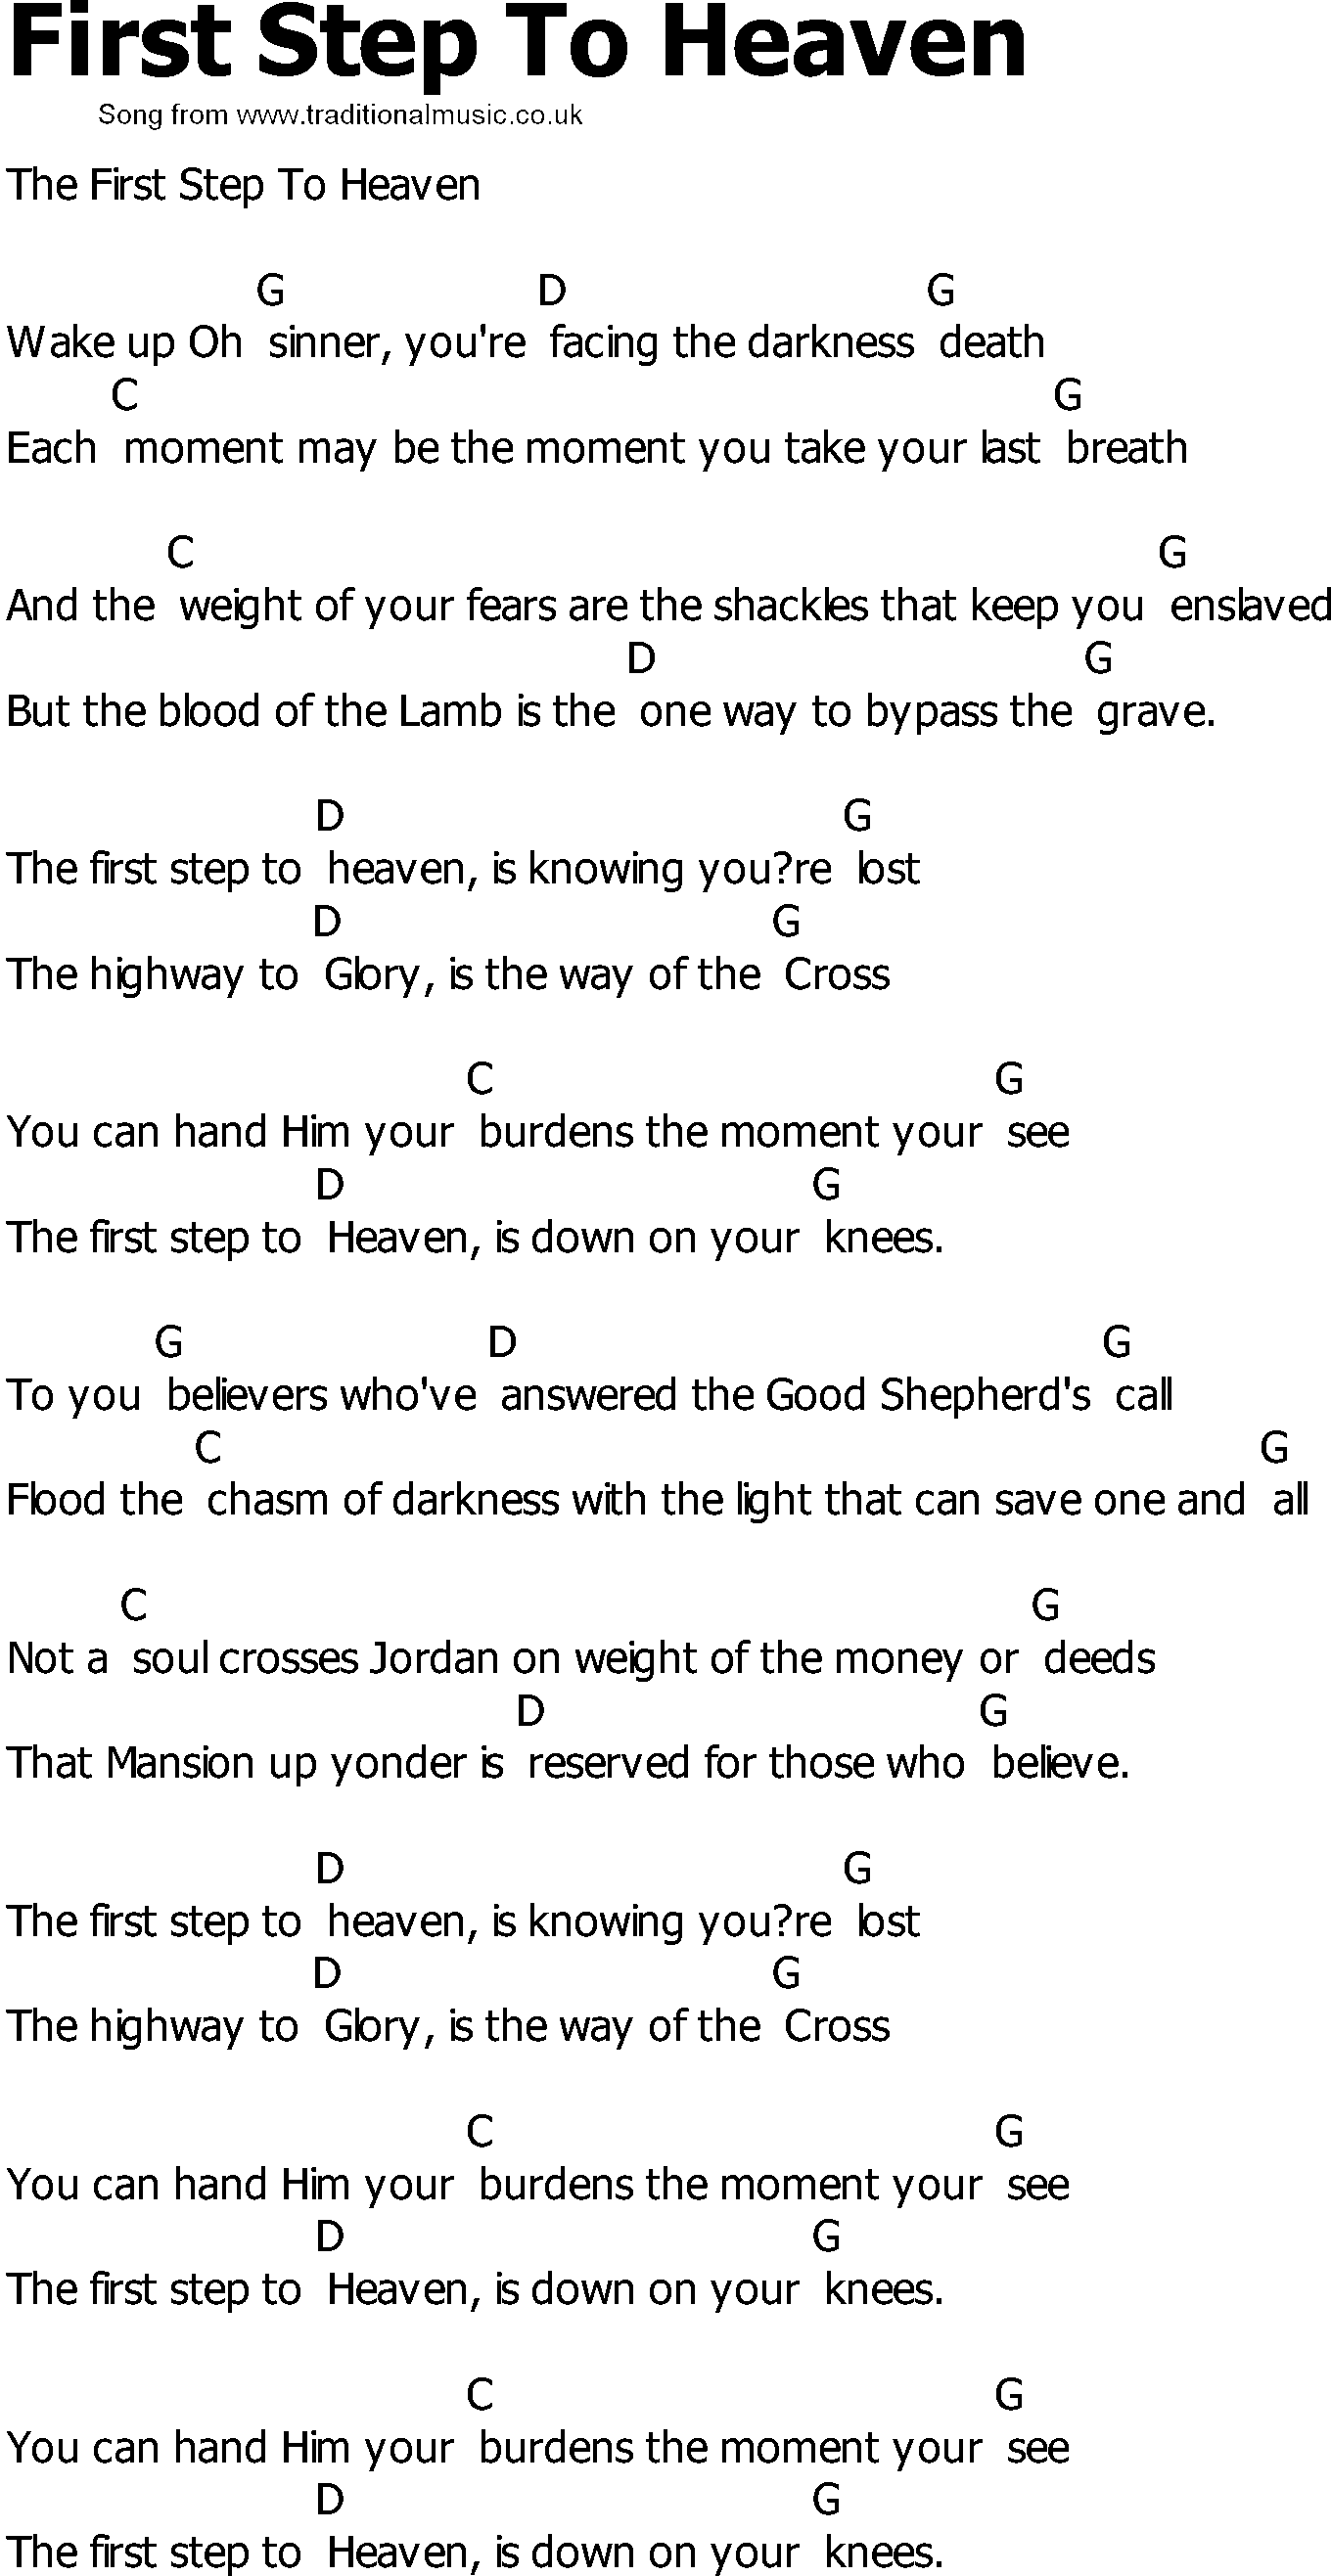 Old Country song lyrics with chords - First Step To Heaven